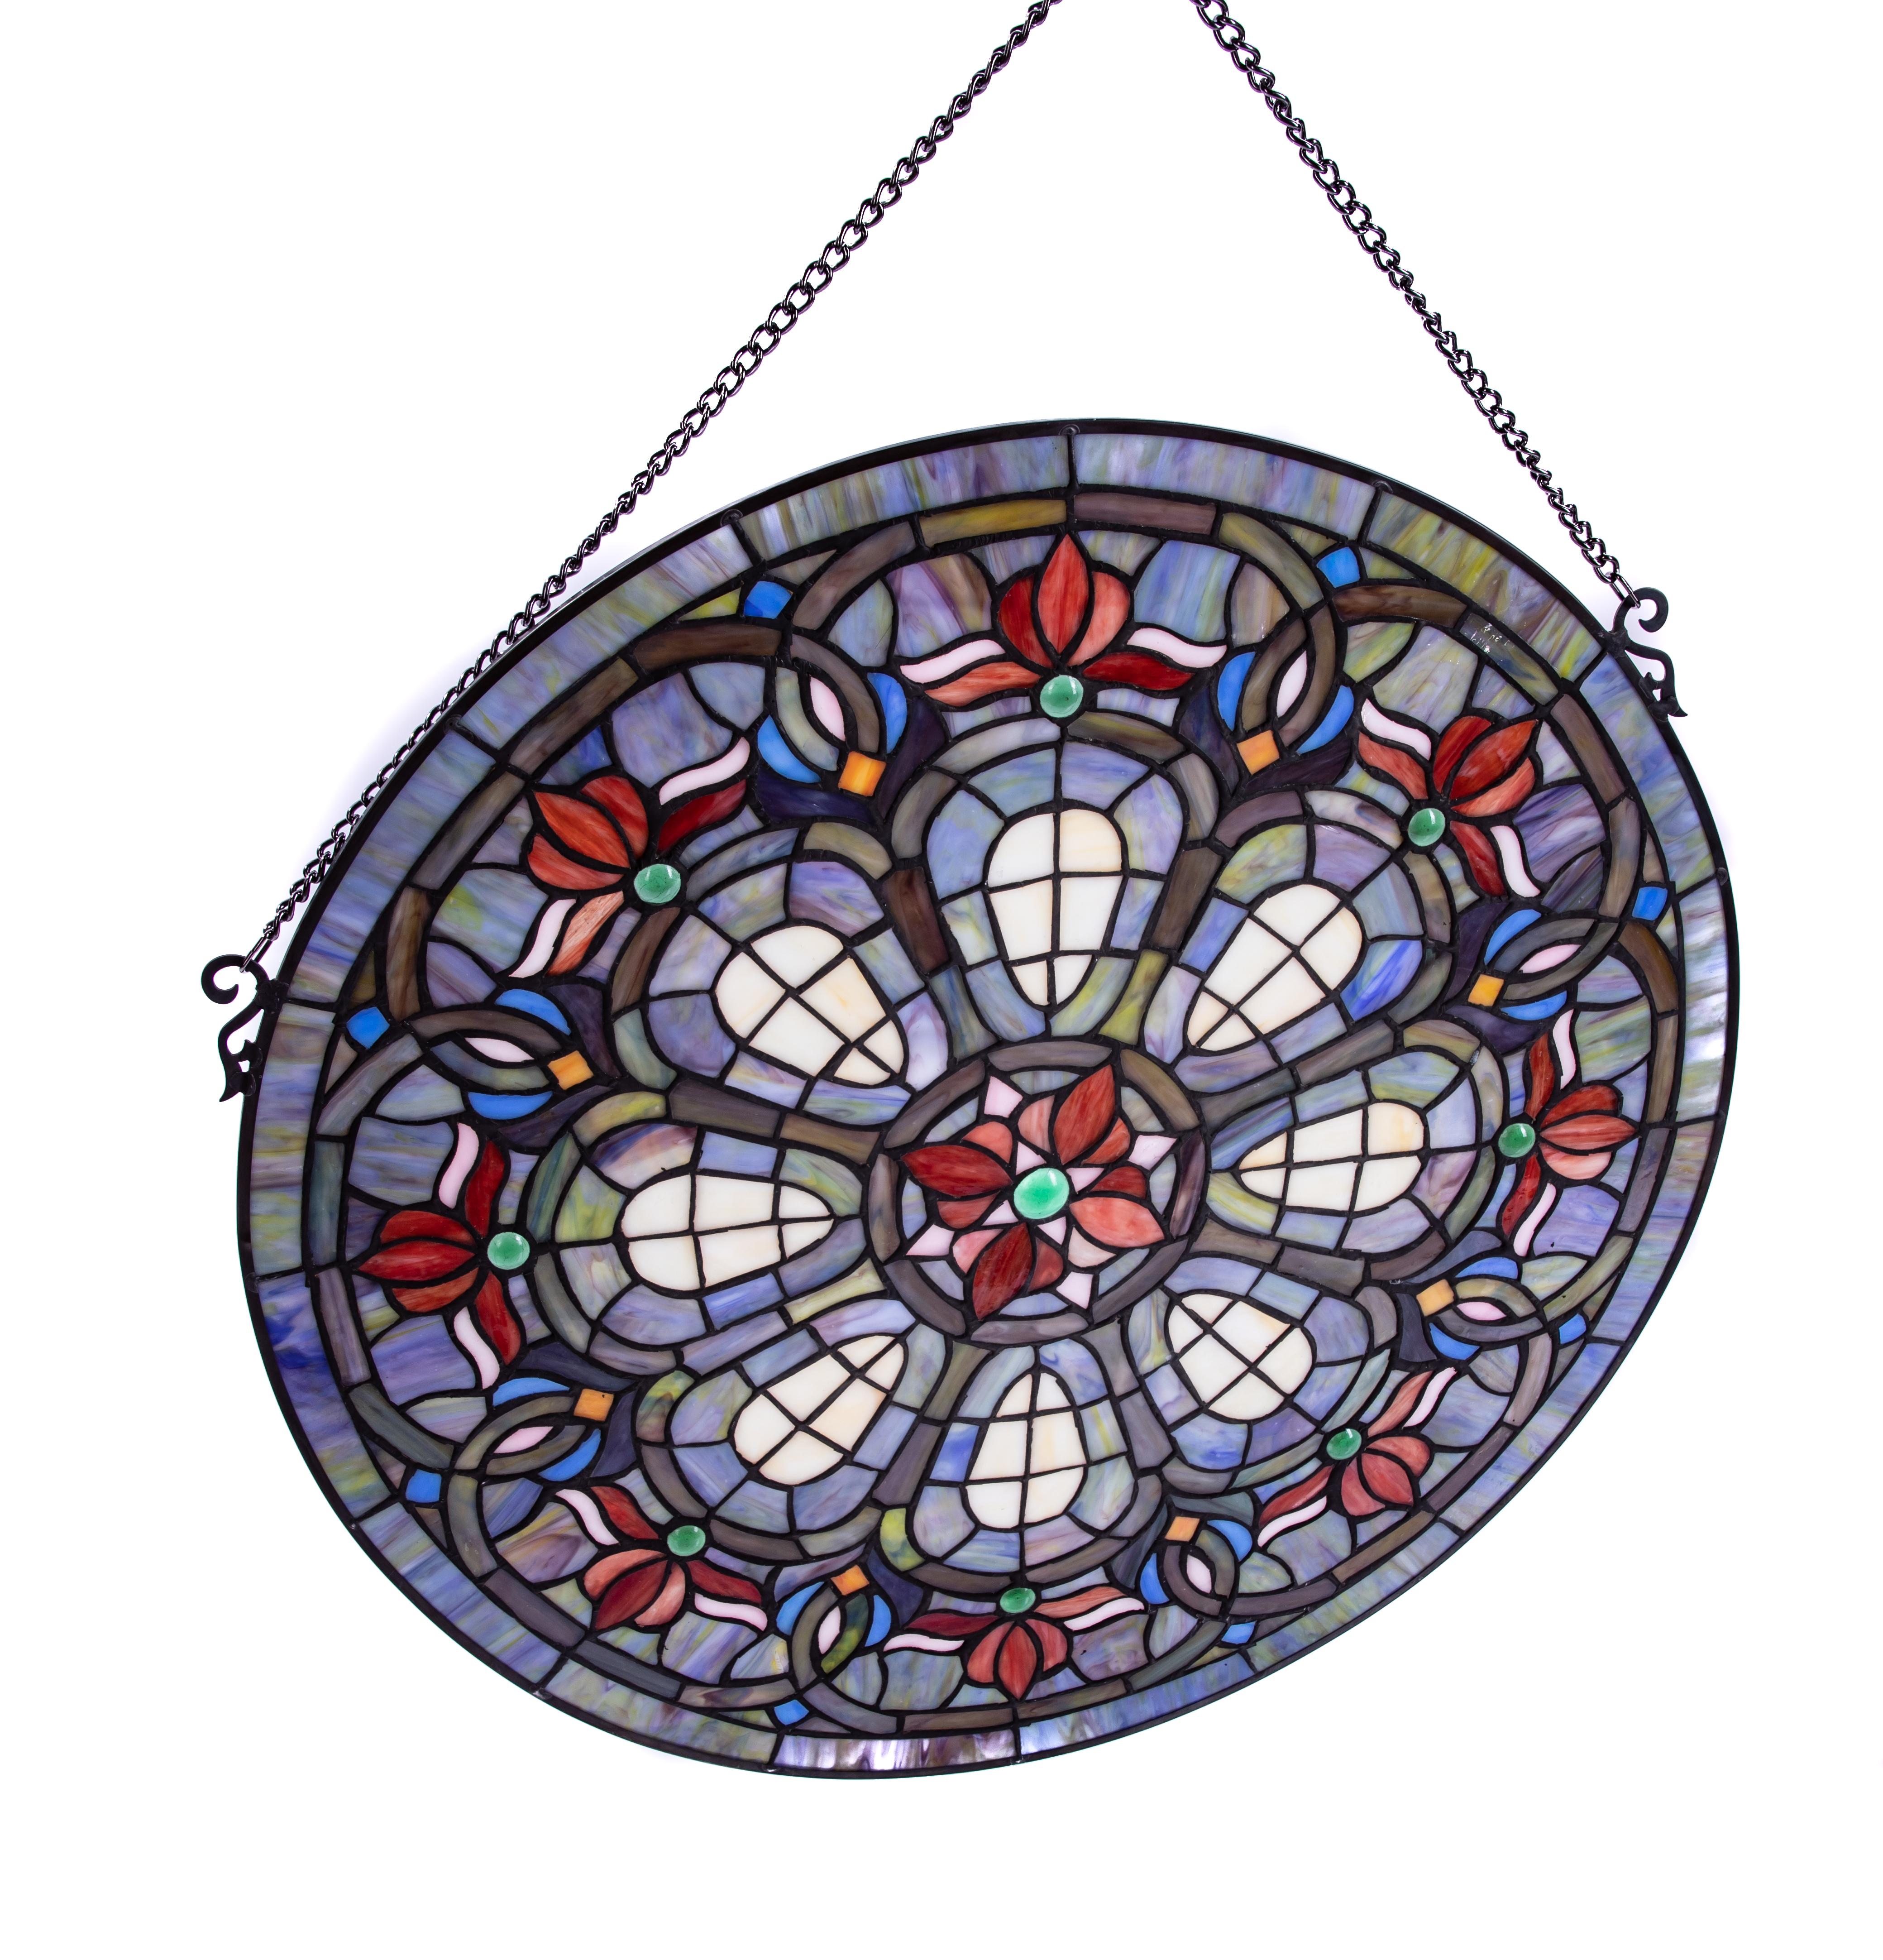 American Classical Stained Glass Panel